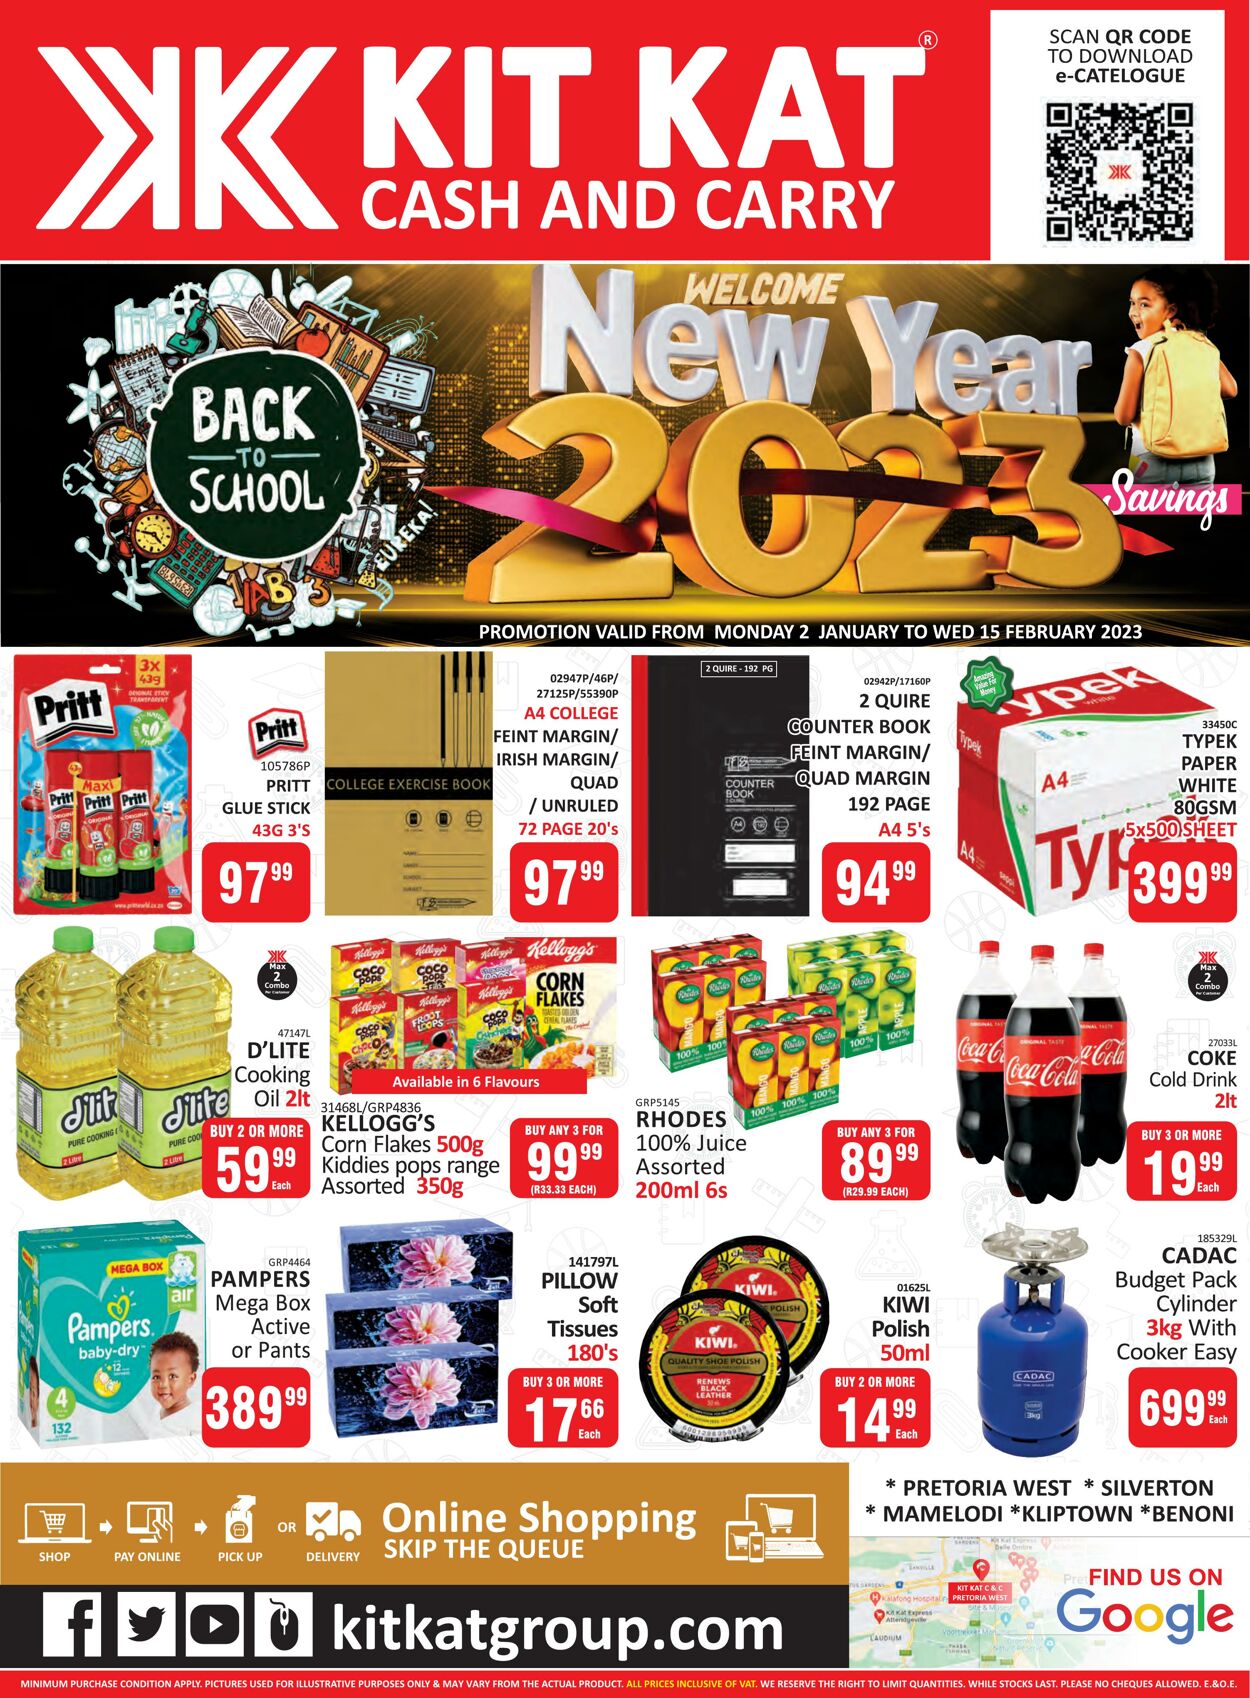 Special Kit Kat Cash and Carry 02.01.2023-15.02.2023